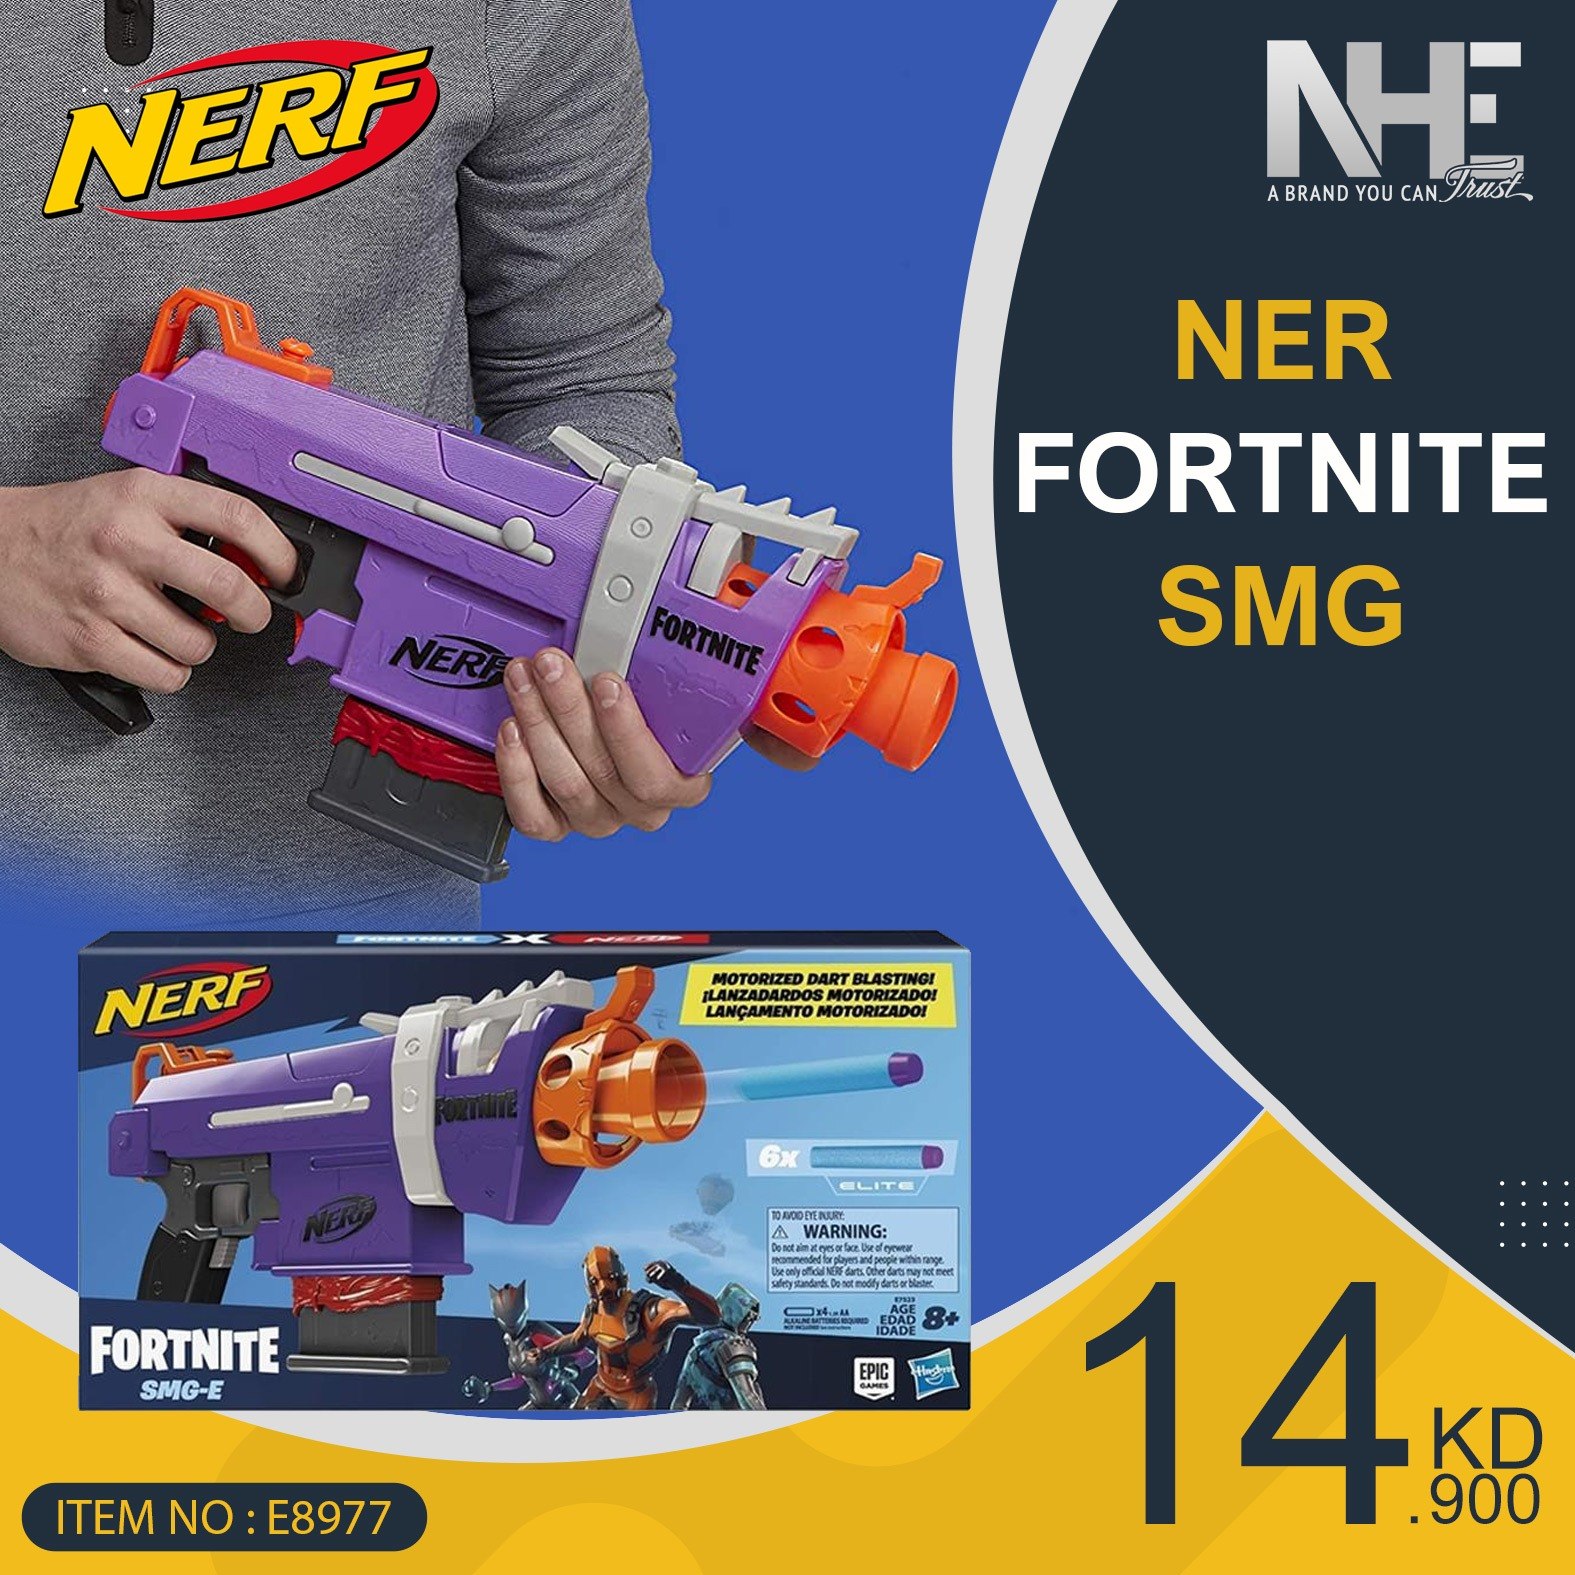 Fortnite FN SCAR Nerf Rifle Launches in 2019 - Legit Reviews